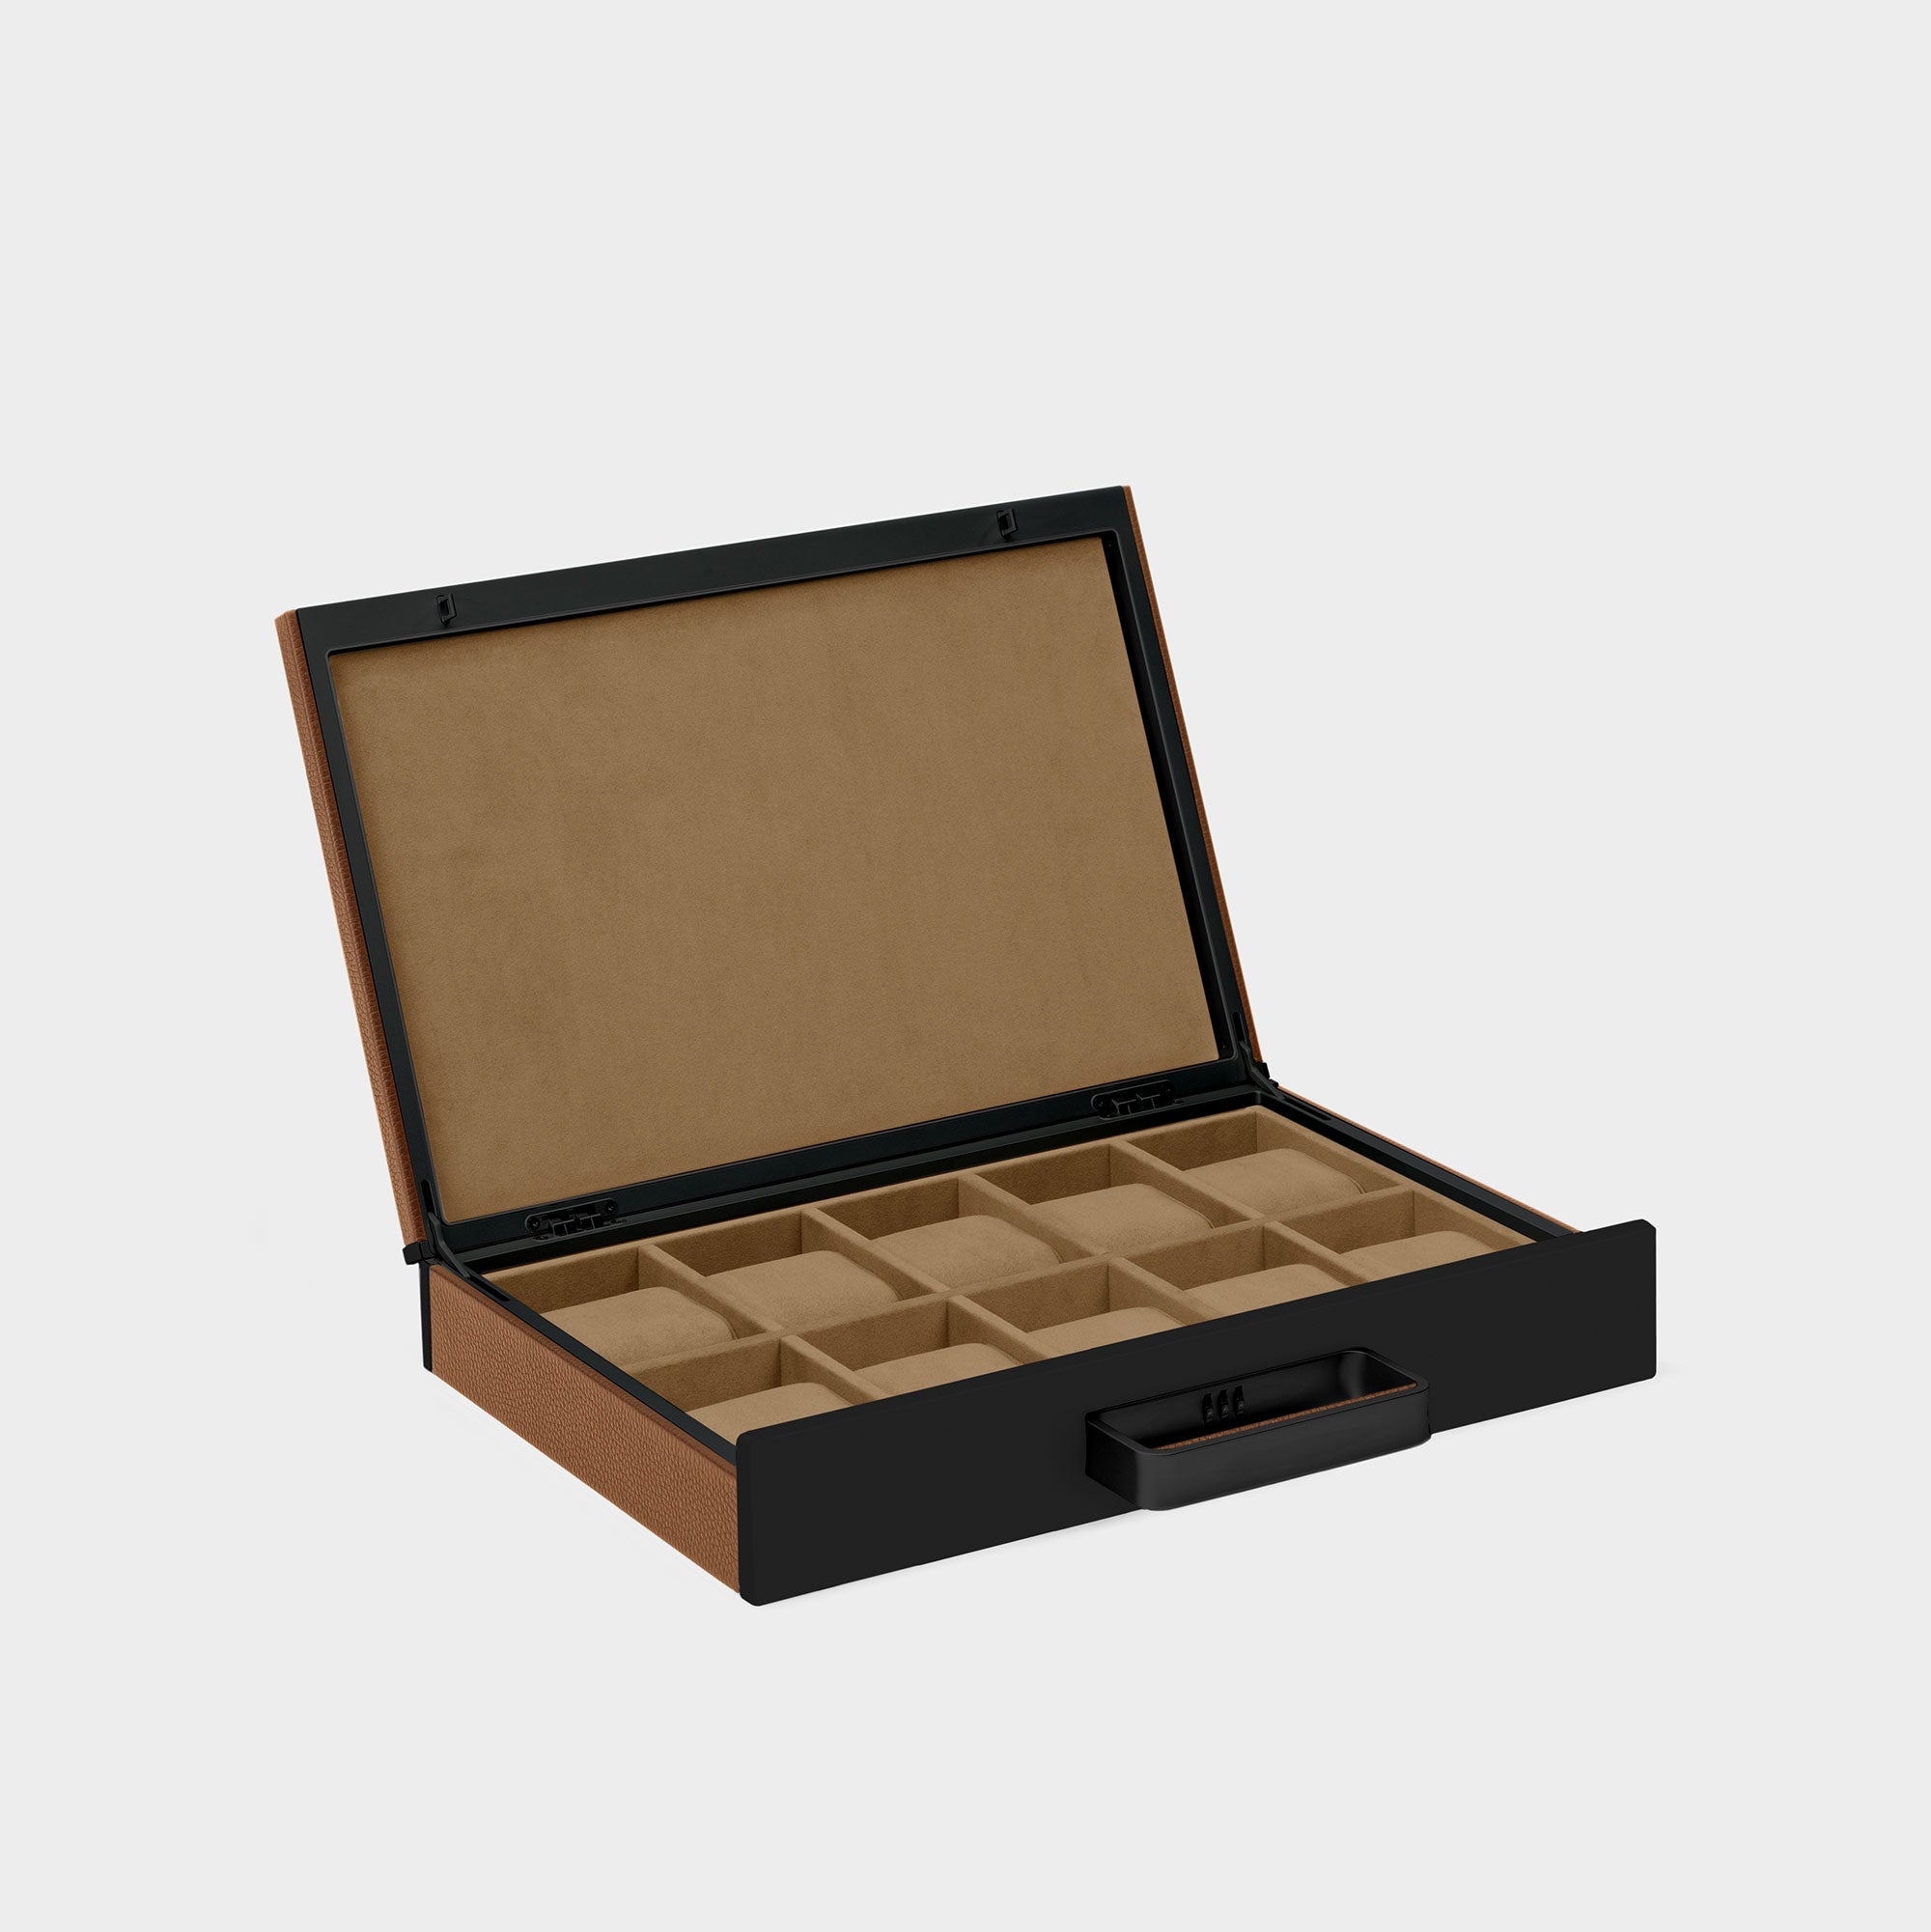 Charles Simon Mackenzie 10 watch briefcase made from fine tan leather, black anodized aluminum and carbon fiber casing and soft camel brown Alcantara interior lining